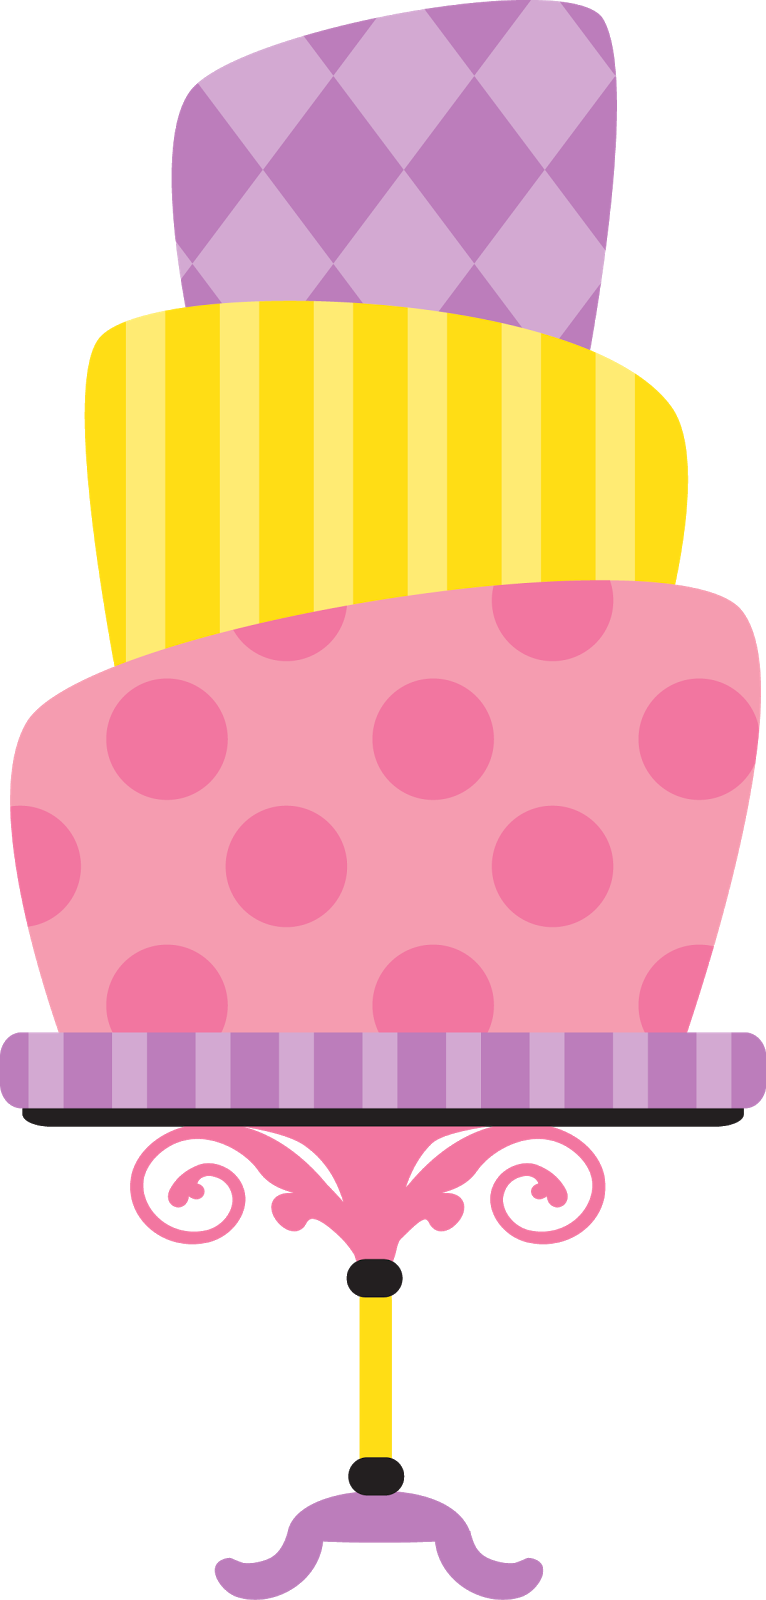 Birthday Cake Party Paper Clip Art - Birthday Cake Party Paper Clip Art (766x1600)